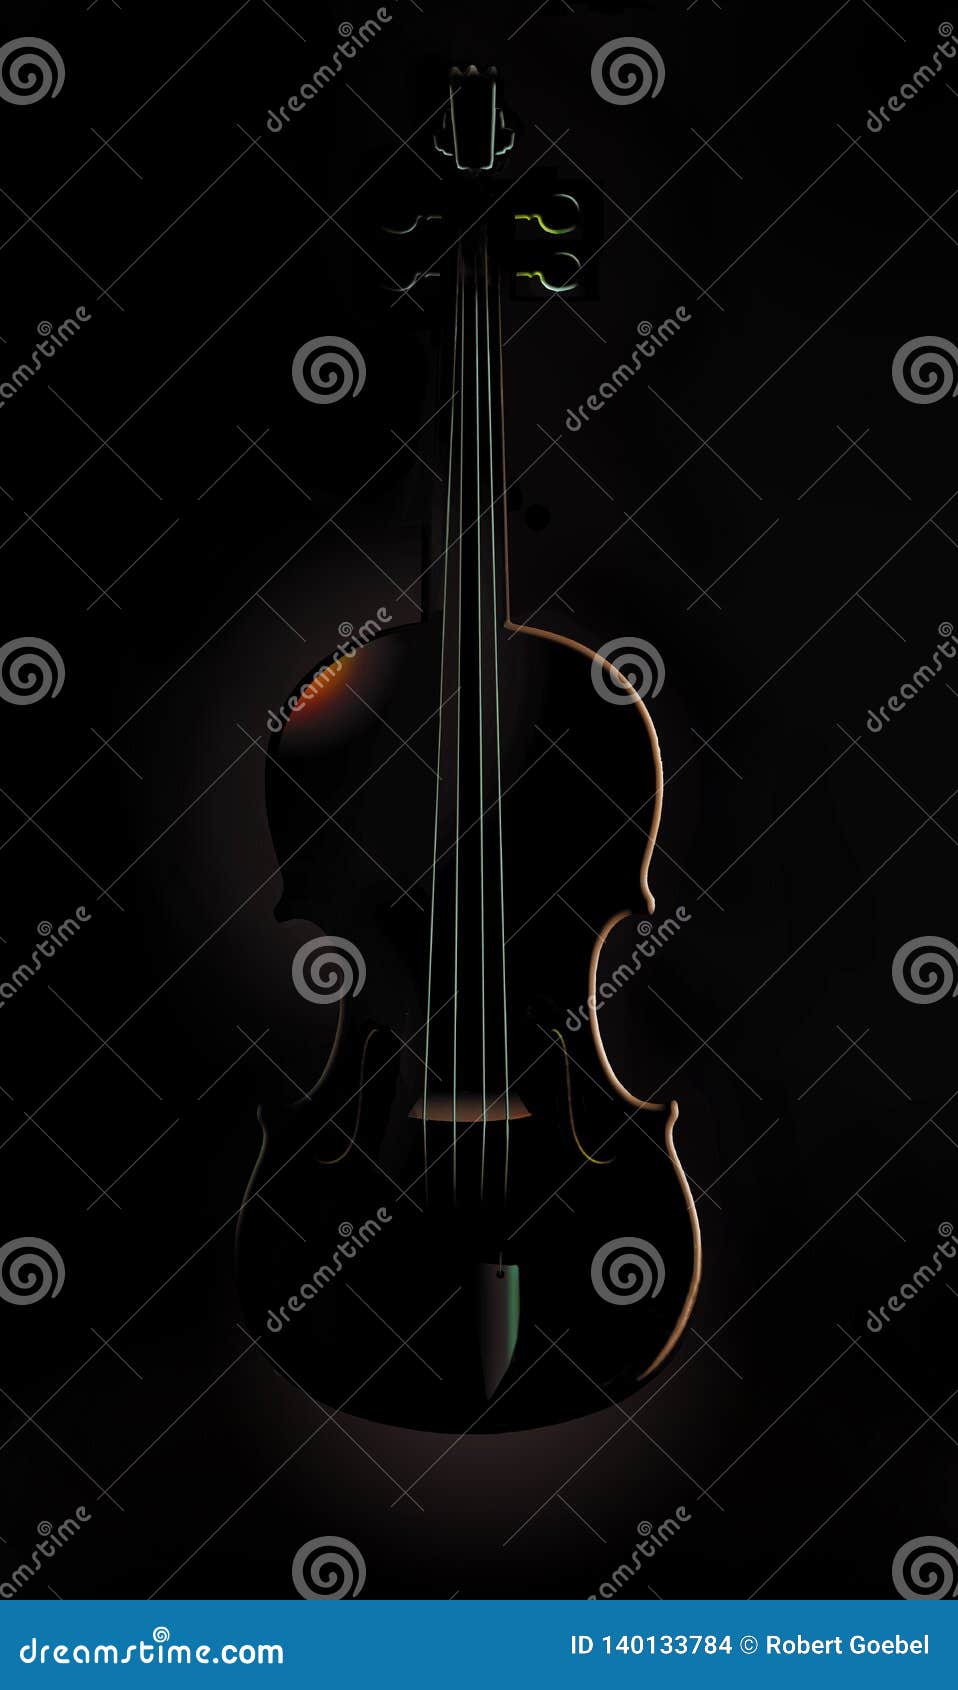 A Violin Is Seen In Striking And Unusual Lighting In This Image Stock